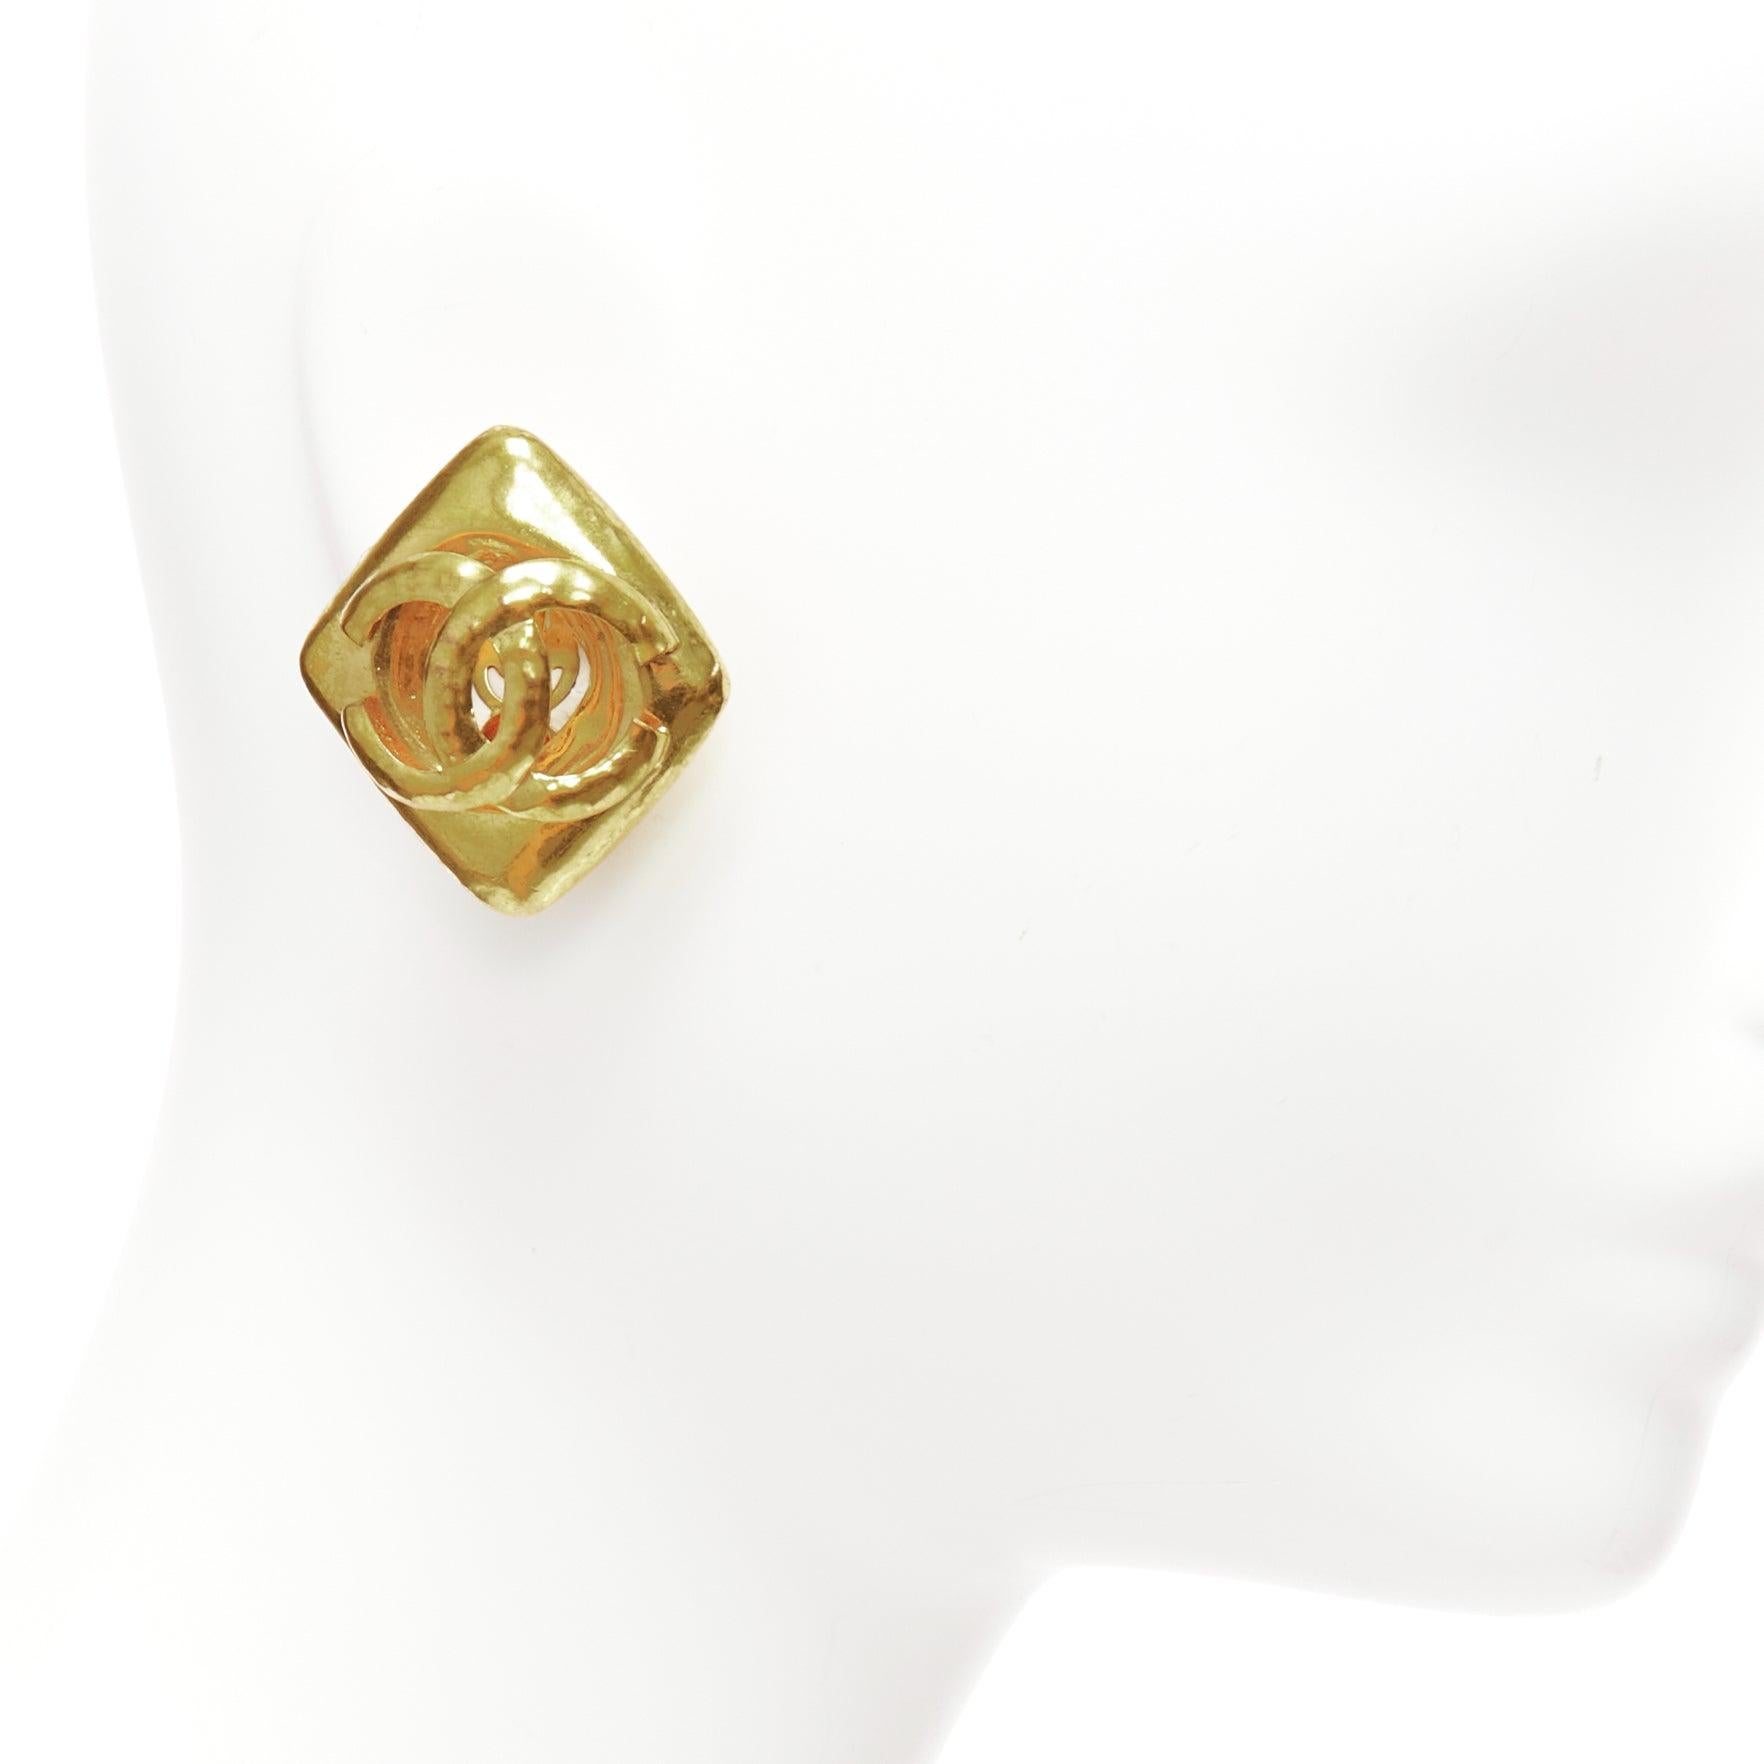 CHANEL Collection 29 Vintage gold tone oversized CC logo trapezium clip on earrings
Reference: TGAS/D00862
Brand: Chanel
Collection: Collection 29
Material: Metal
Color: Gold
Pattern: Solid
Closure: Clip On
Lining: Gold Metal
Extra Details: Gold